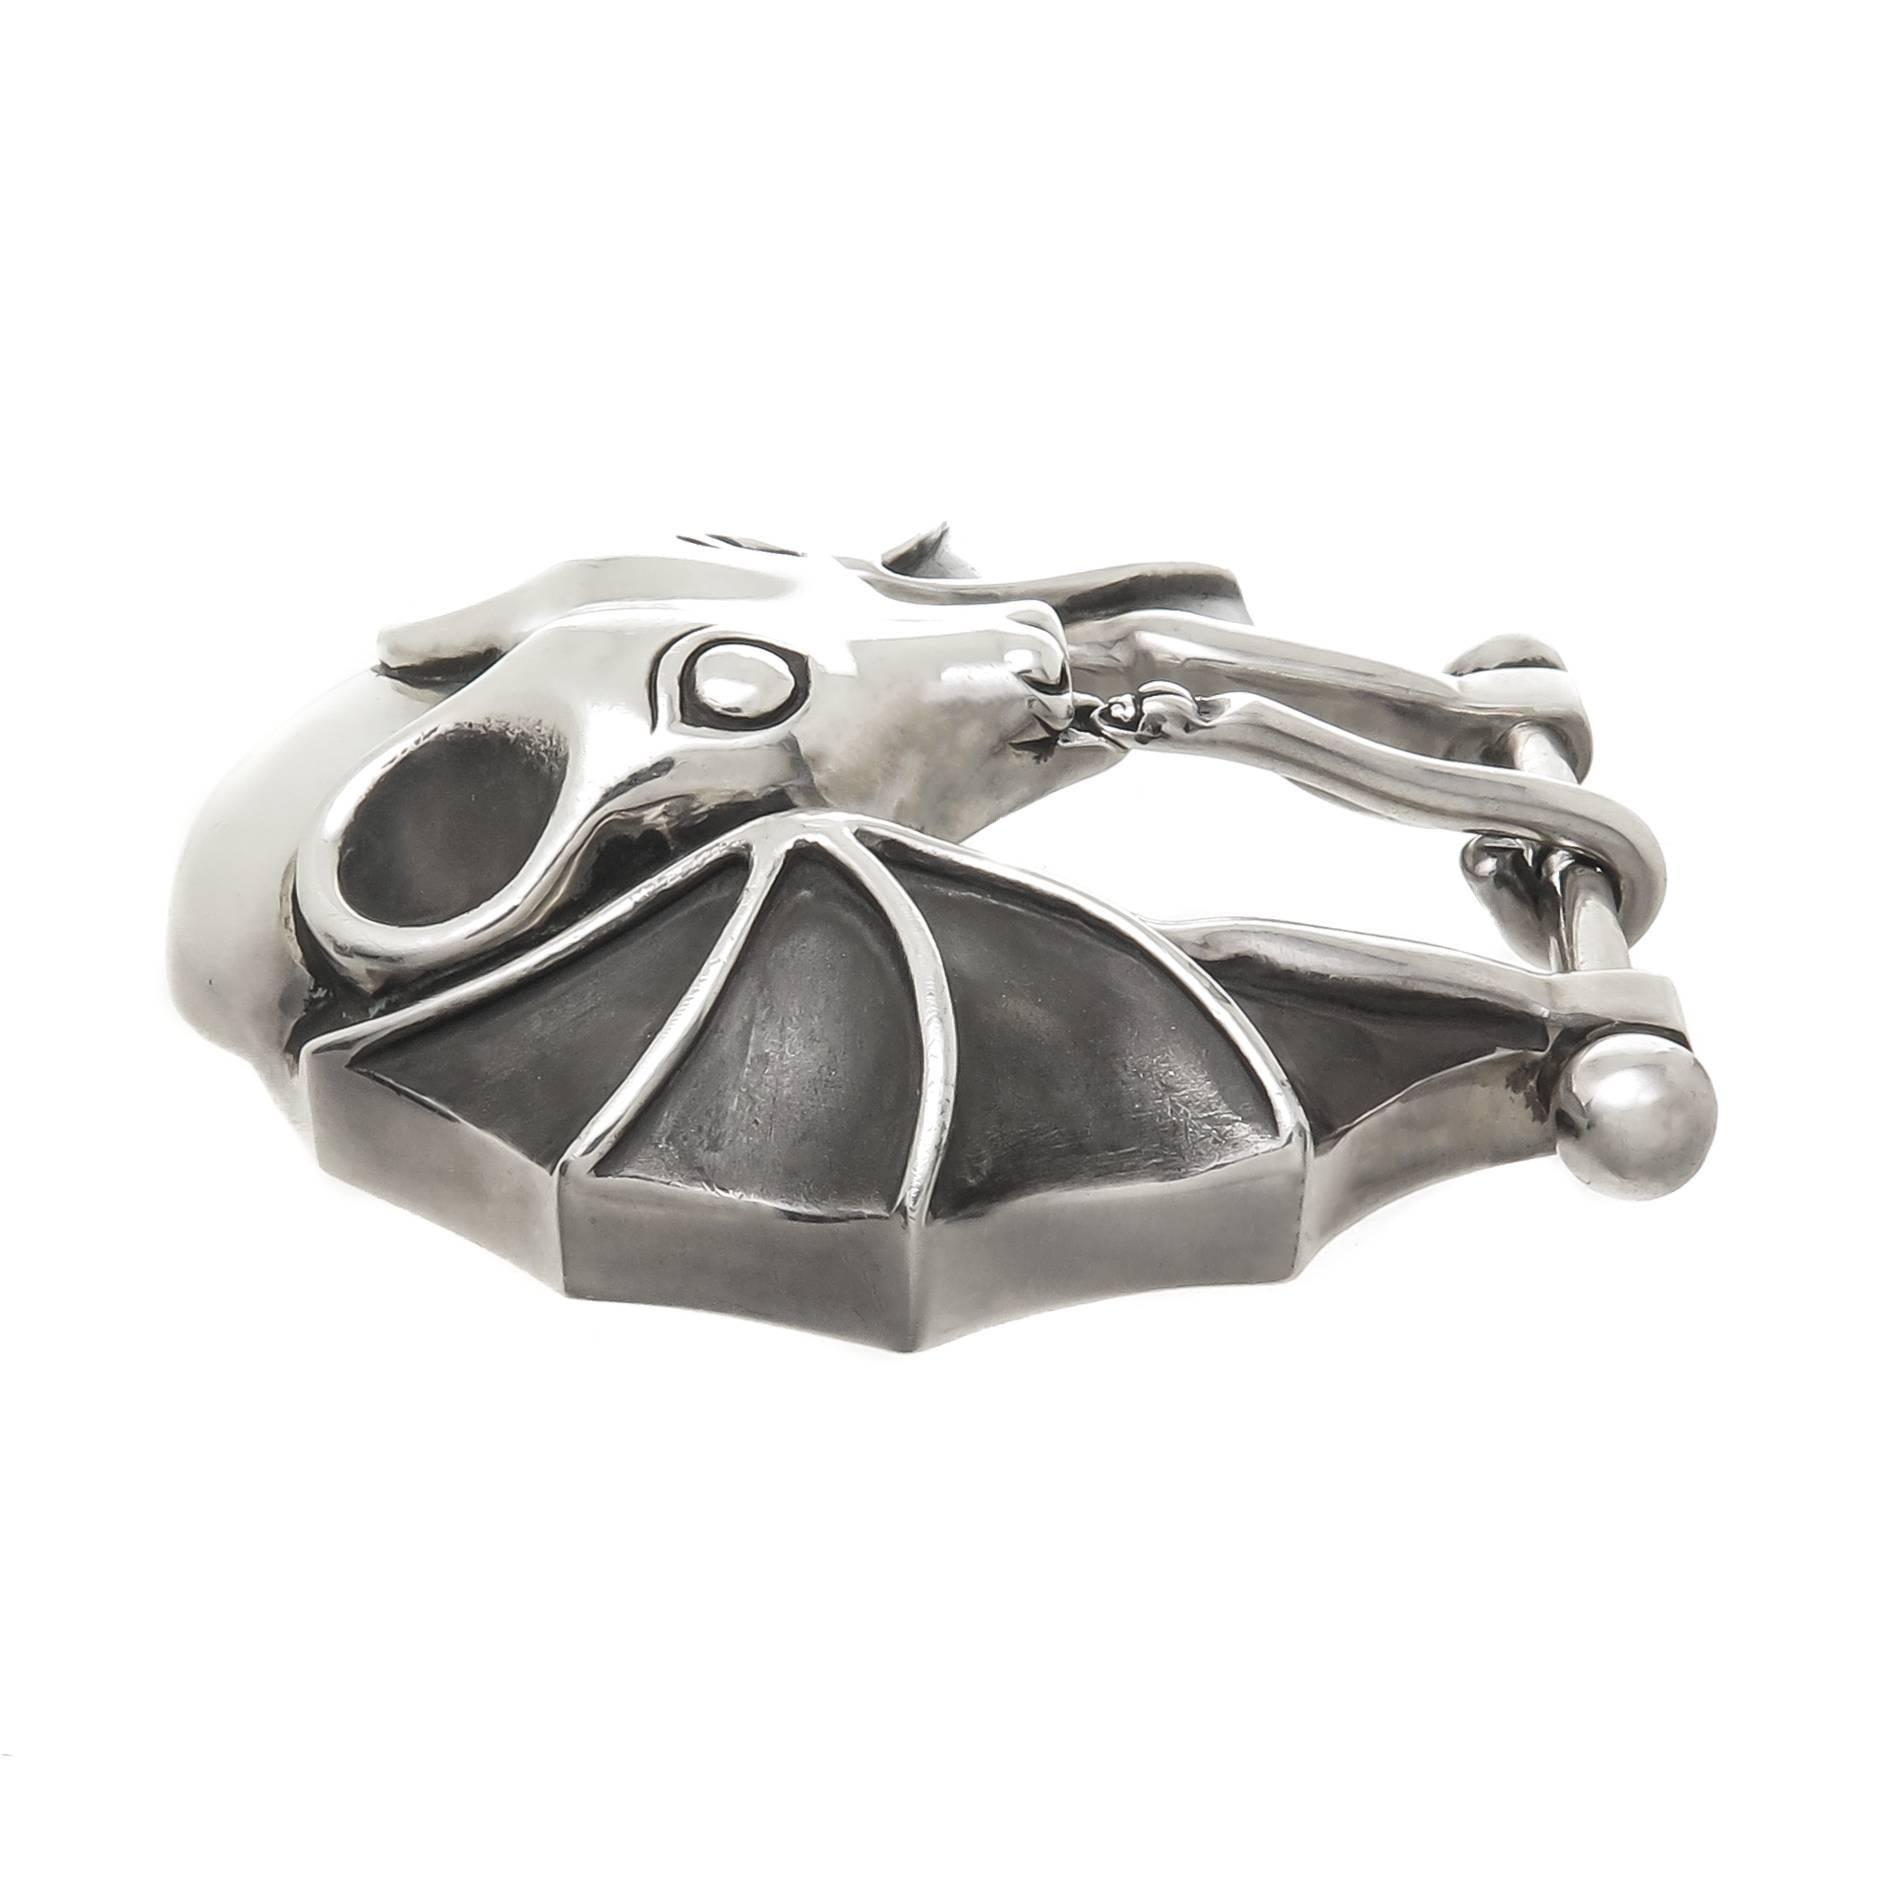 Circa 1990s Too Cool, Sterling Silver Bat Belt Buckle by Barry Kieselstein Cord, measuring 2 1/2 X  2 1/2 inch and weighing 3 ounces, having a bright polish finish with a dull gray finish in the Wings. Fits a 1 inch wide belt. 